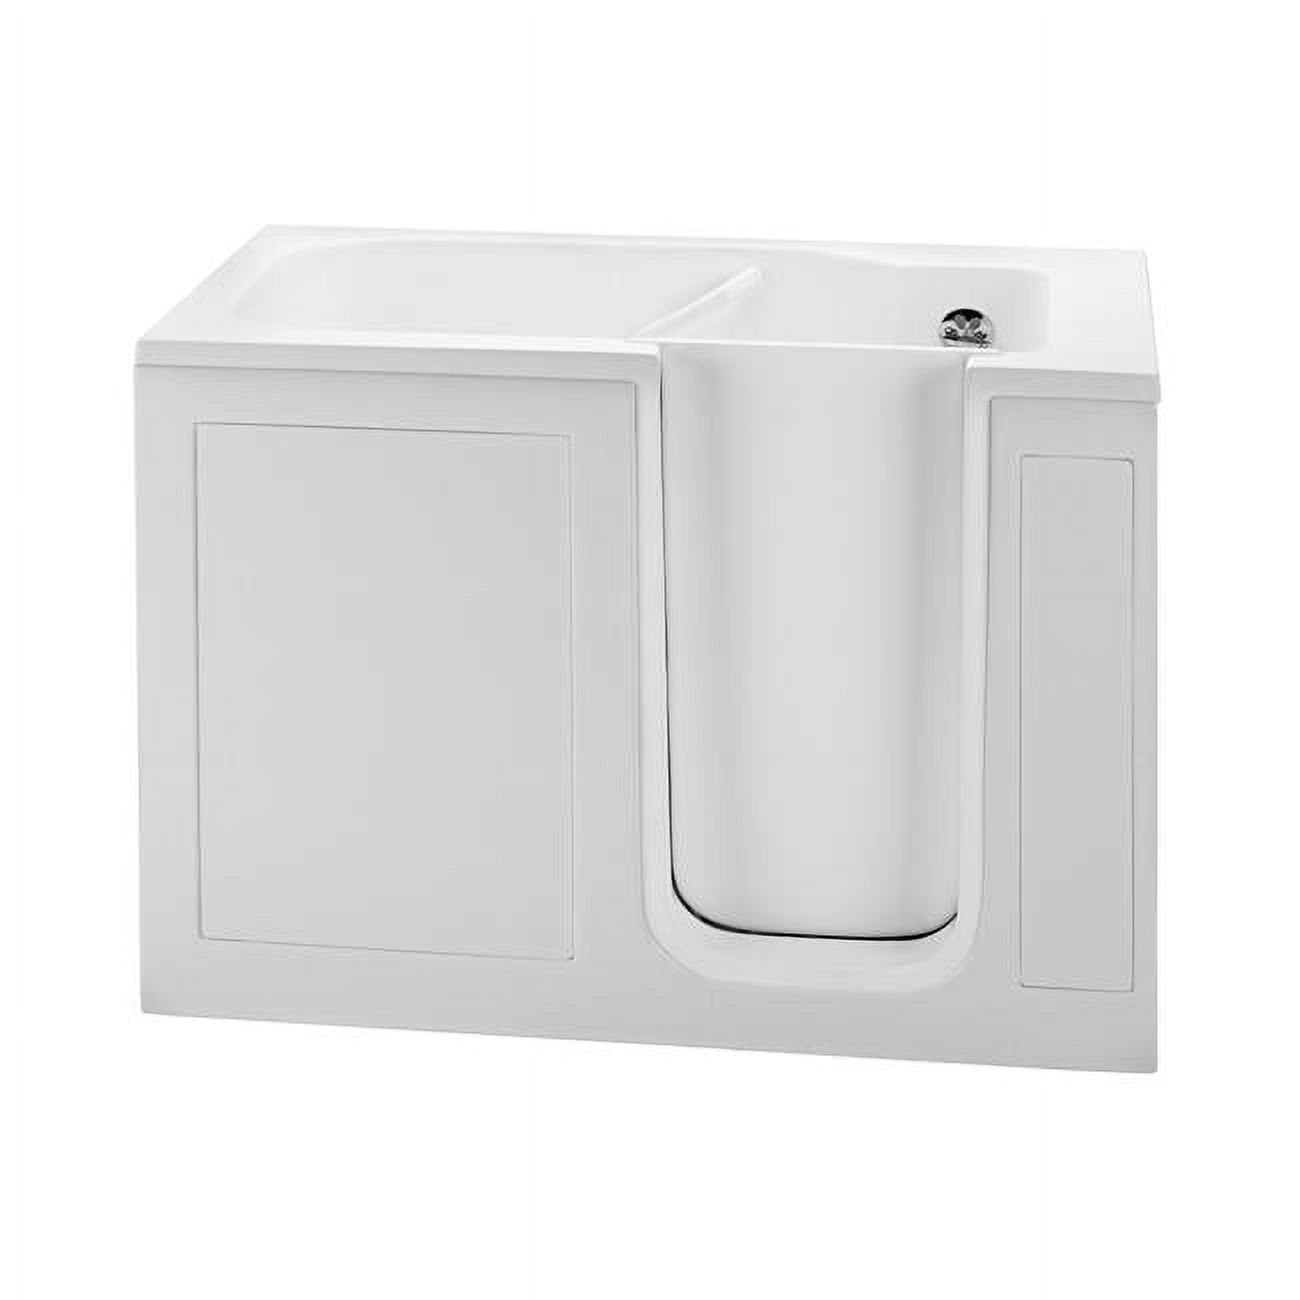 Walk in Whirlpool Bath with Radiance & Valves, Biscuit - 51.5 x 30.25 x 37.5 in. - image 1 of 1